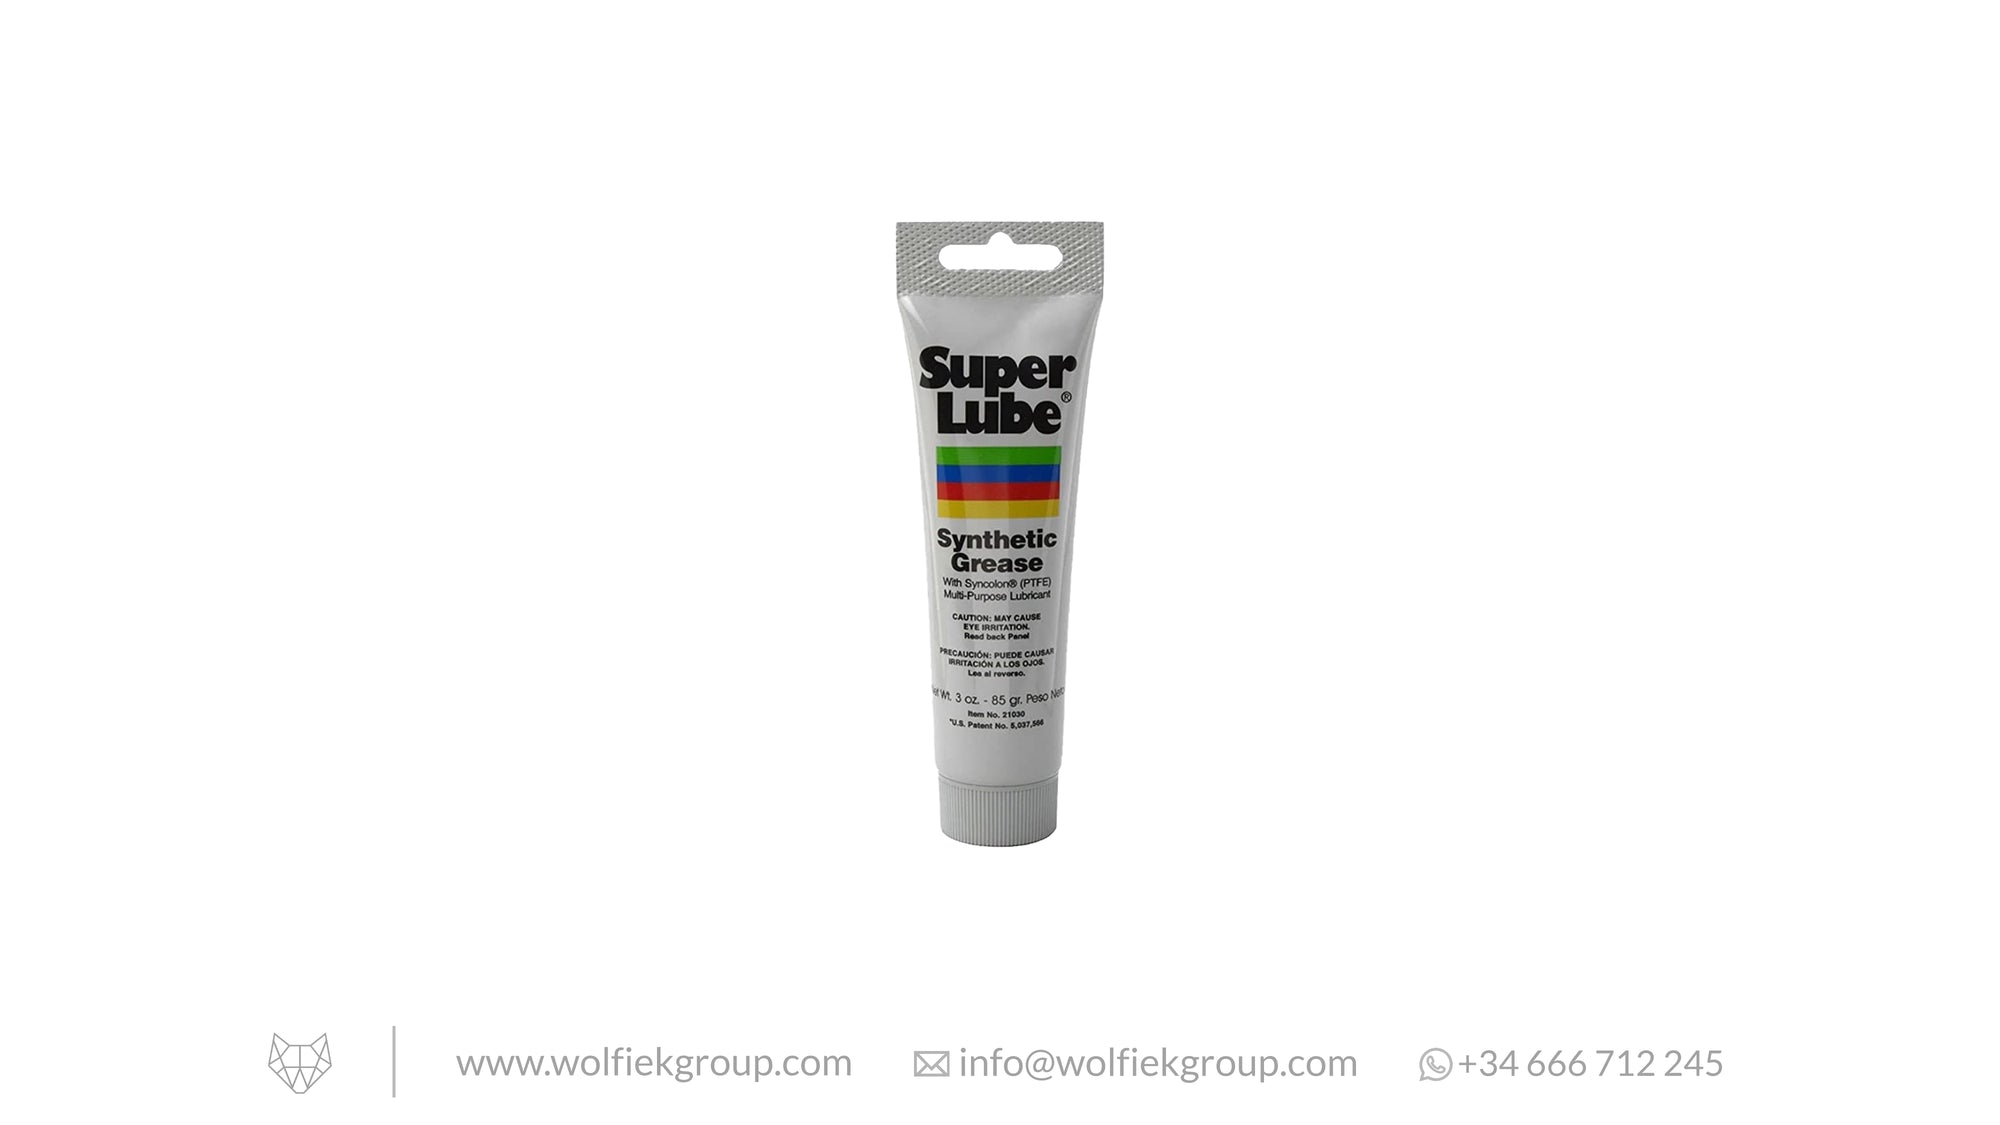 Tube of Super Lube silicone grease that hydrates the carbine